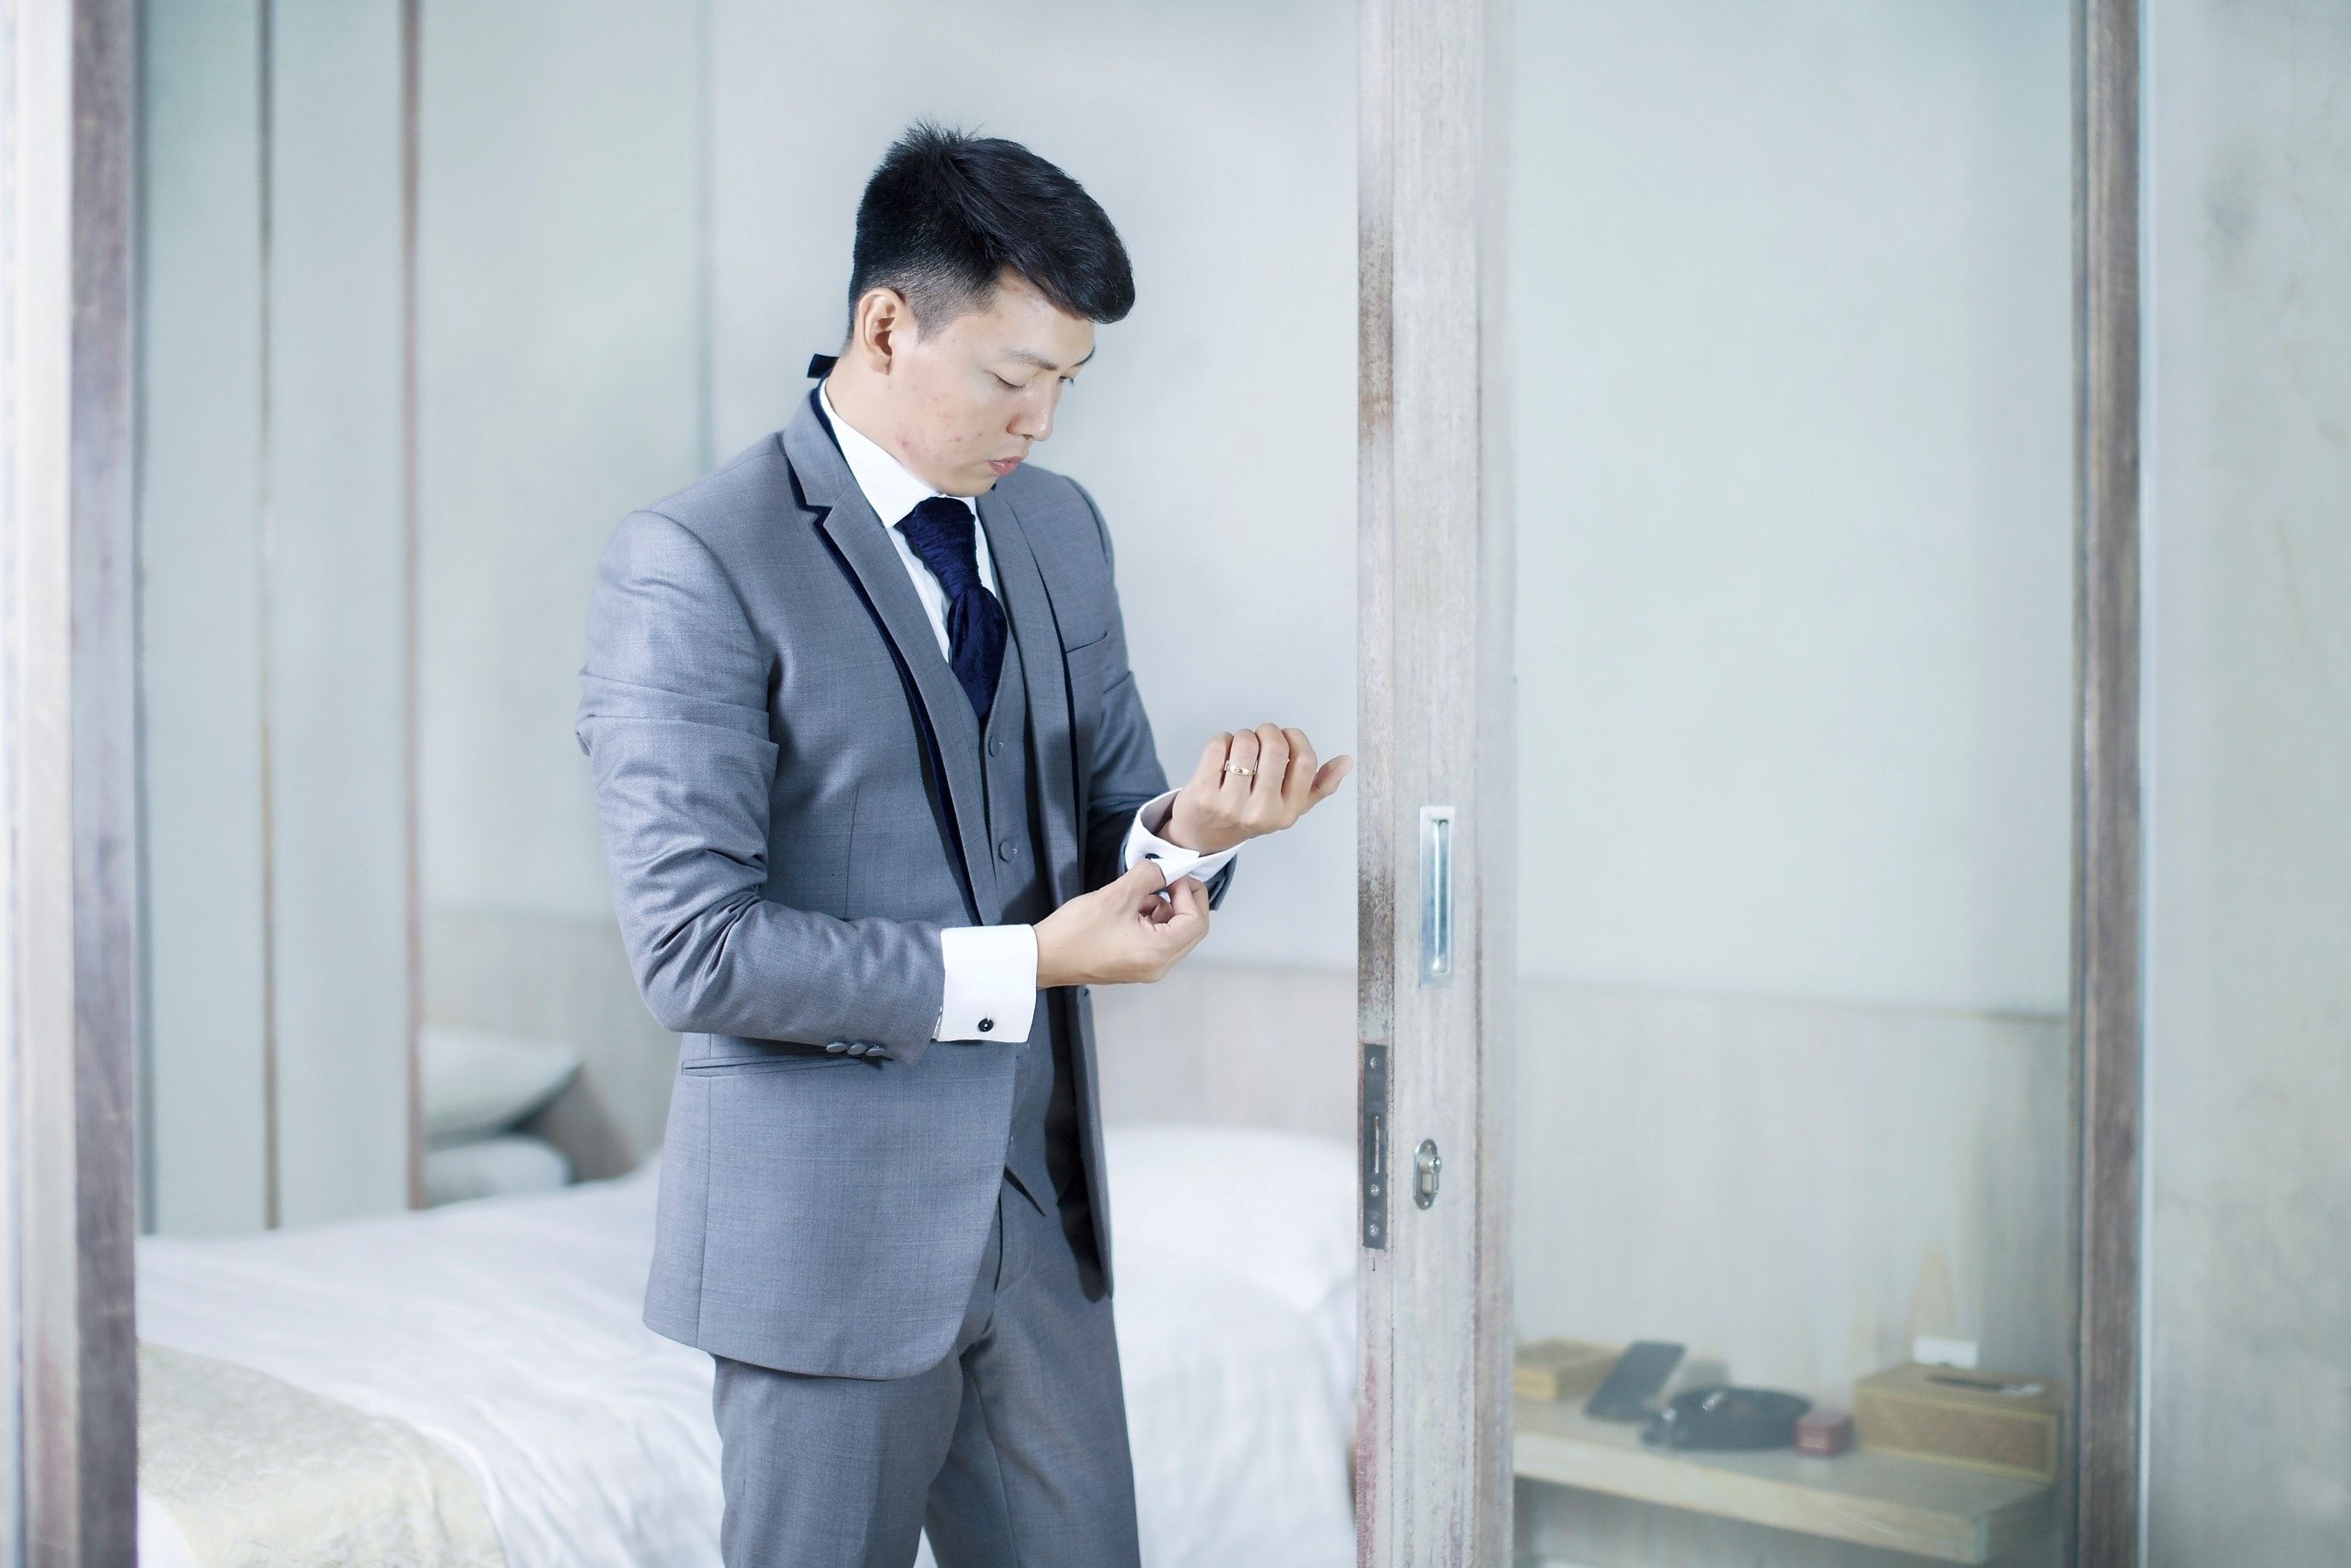 Man in gray suit adjusts his sleeves inside a glass-walled office